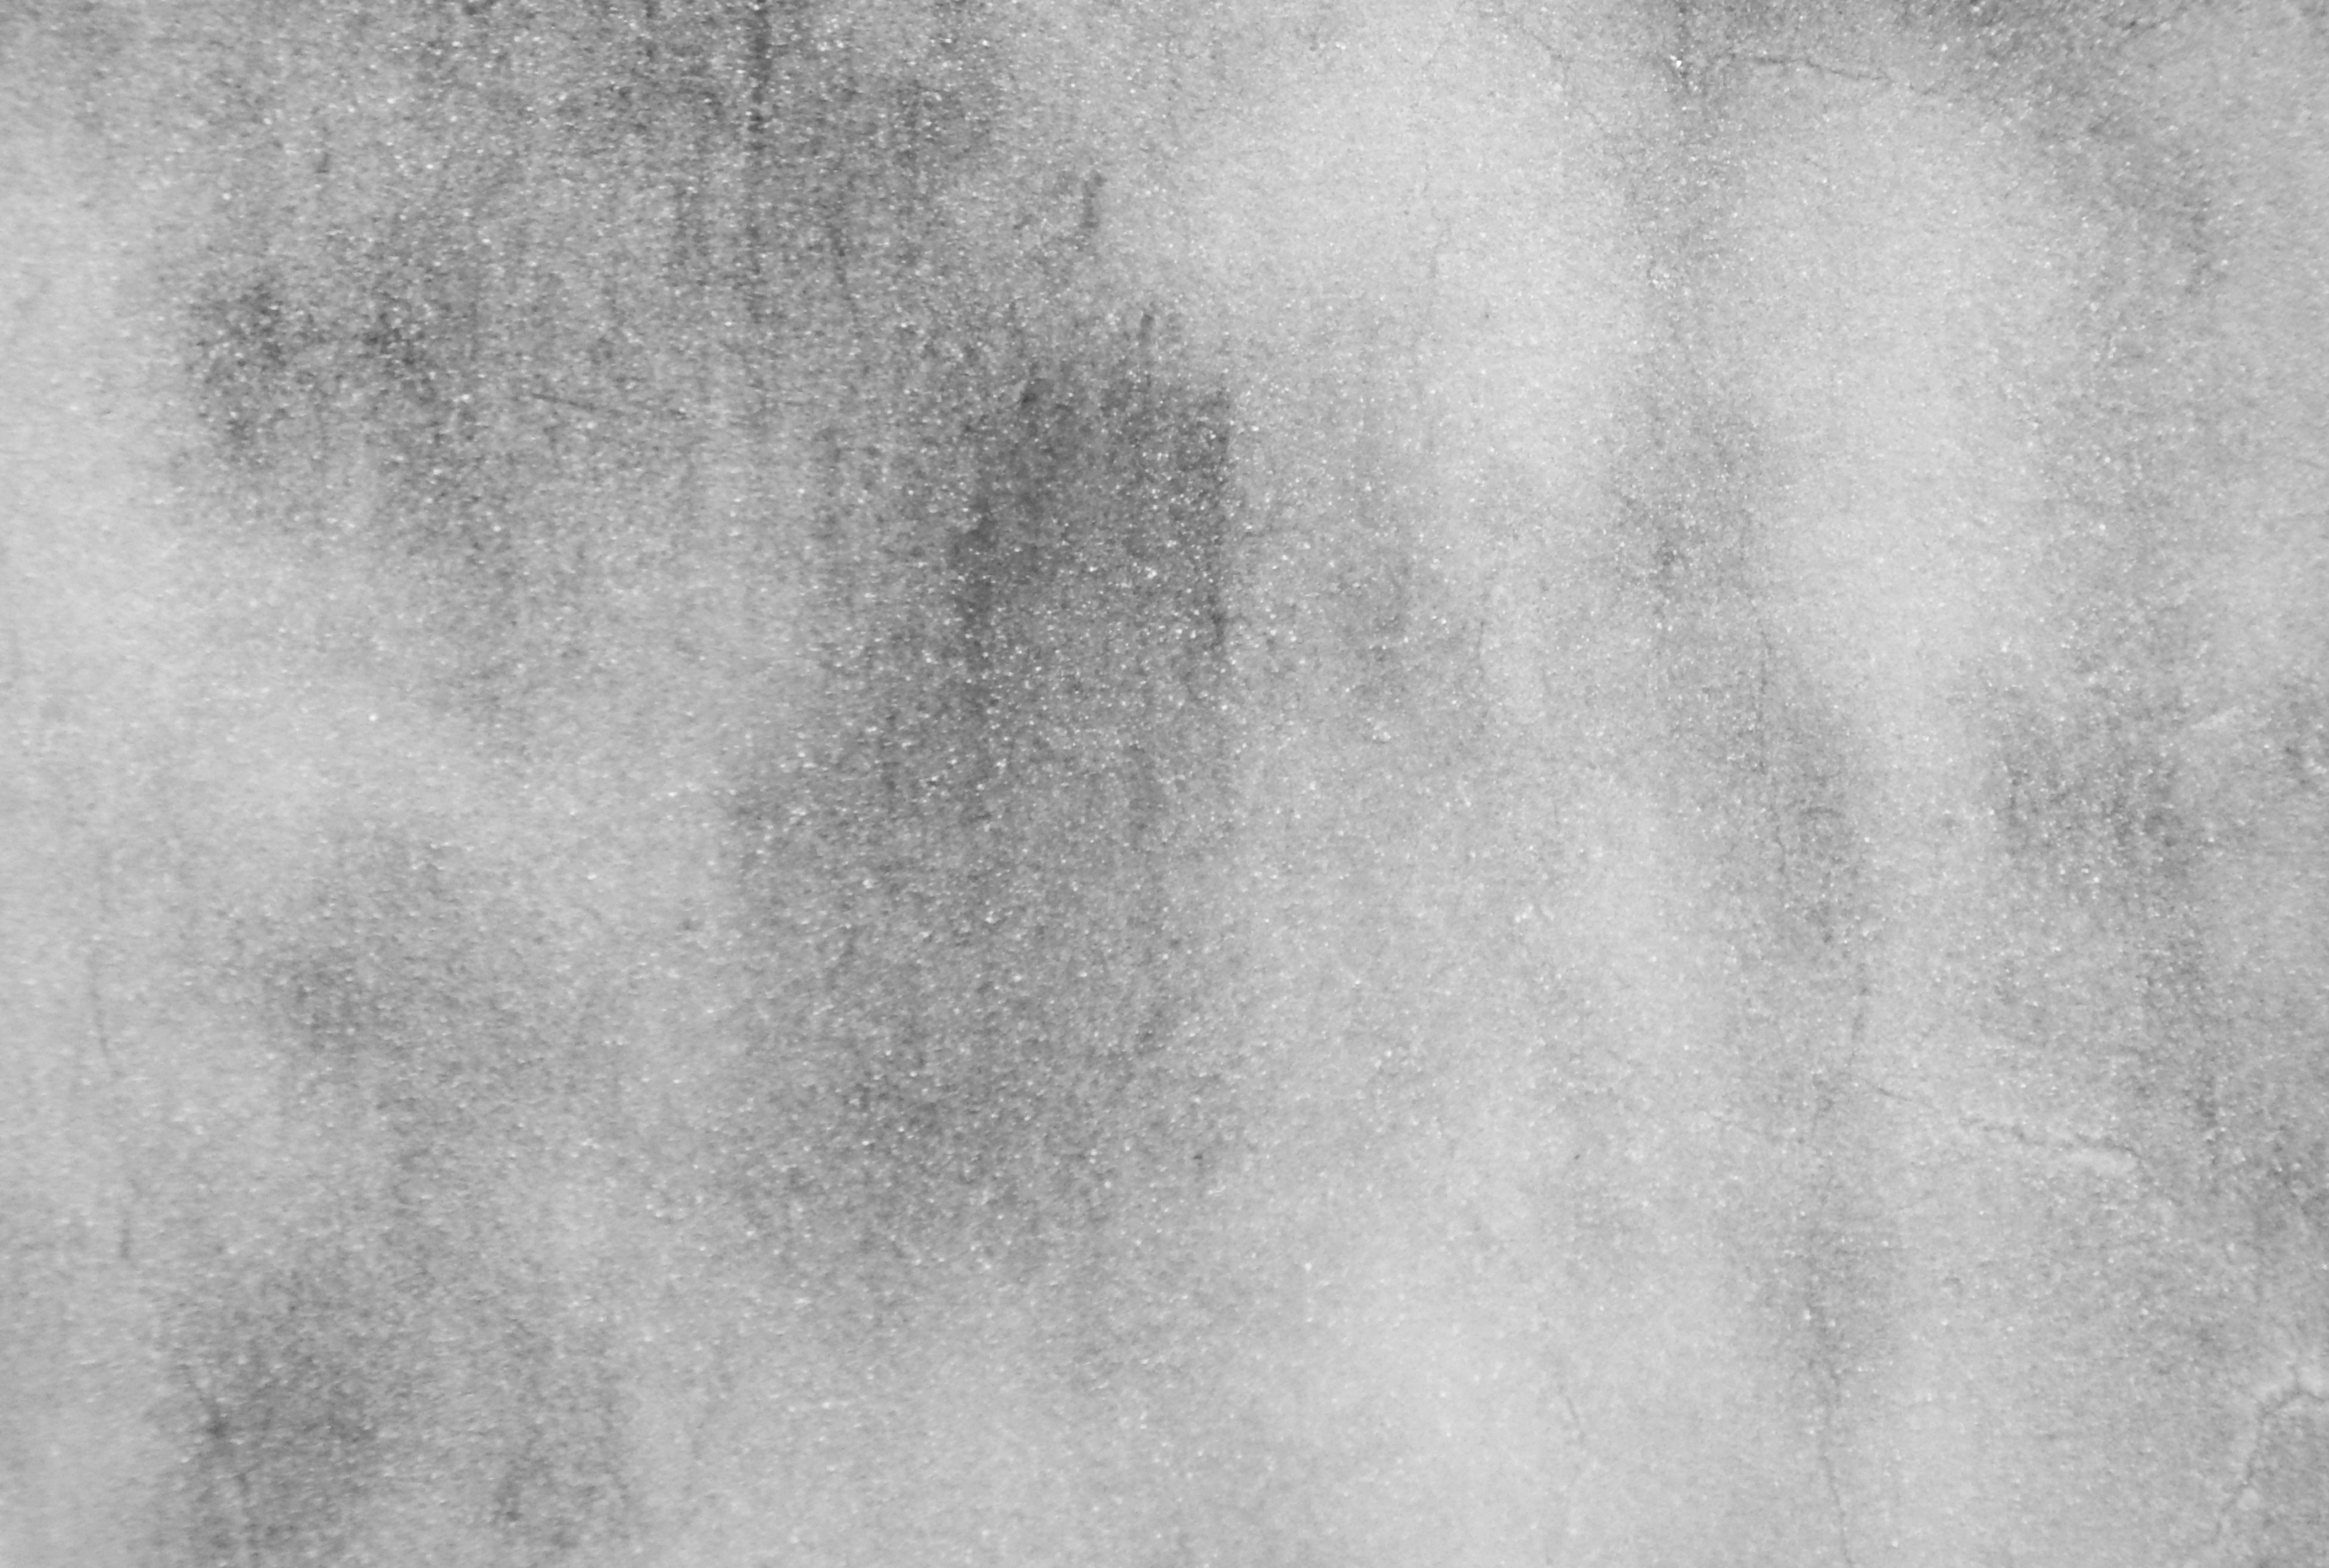 Grey Concrete Texture, Abandoned, Surface, Patterned, Retro, HQ Photo